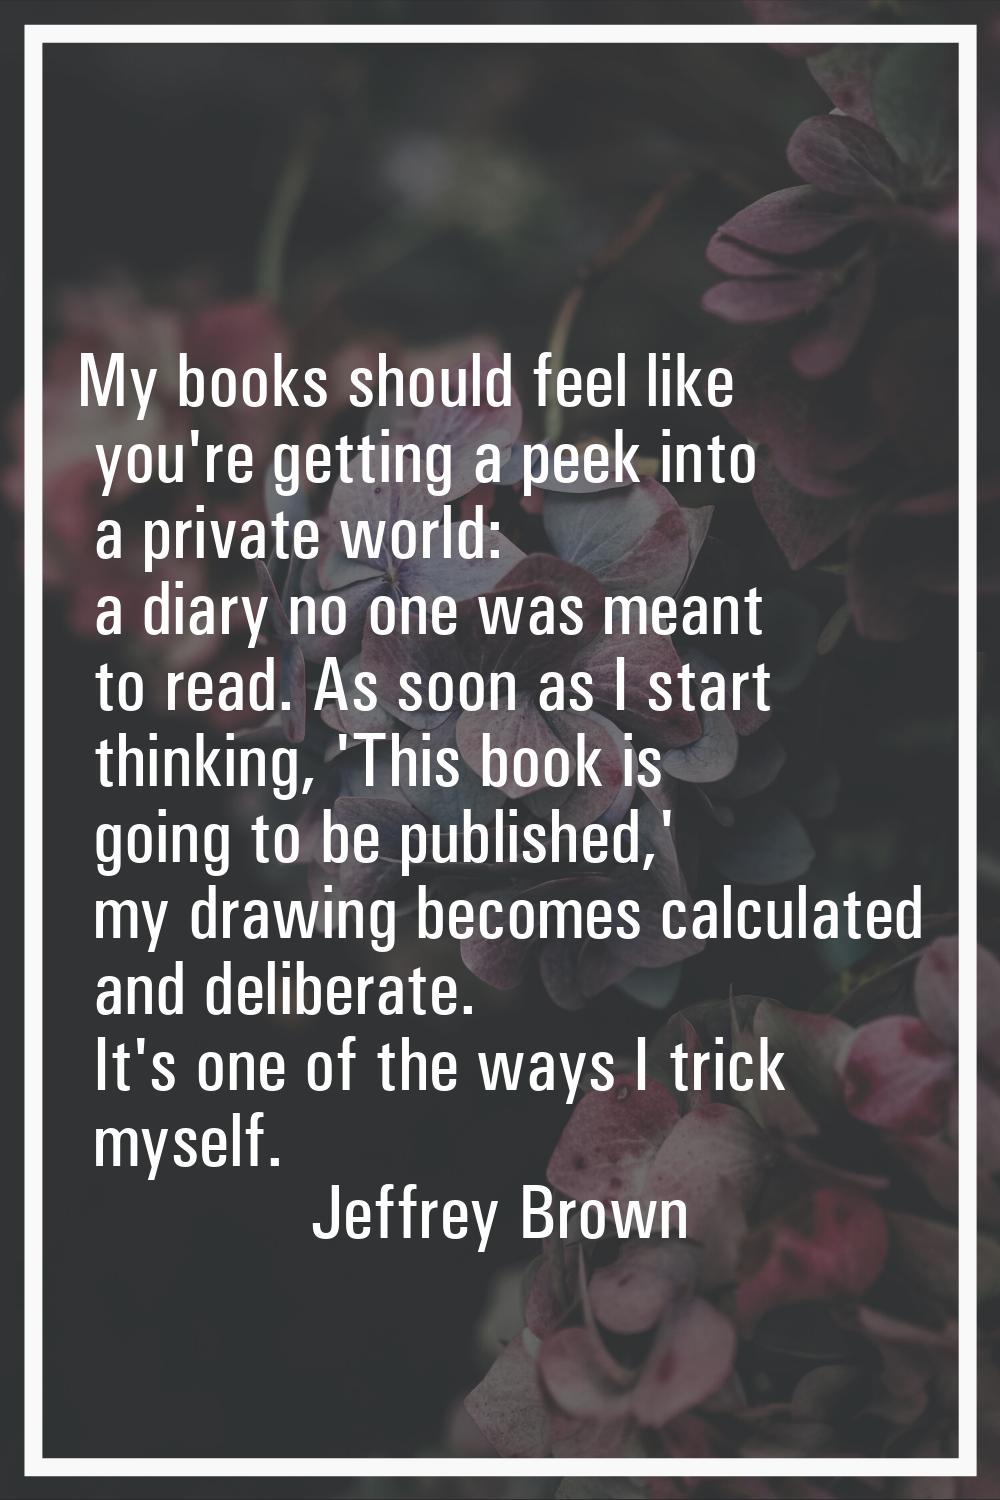 My books should feel like you're getting a peek into a private world: a diary no one was meant to r